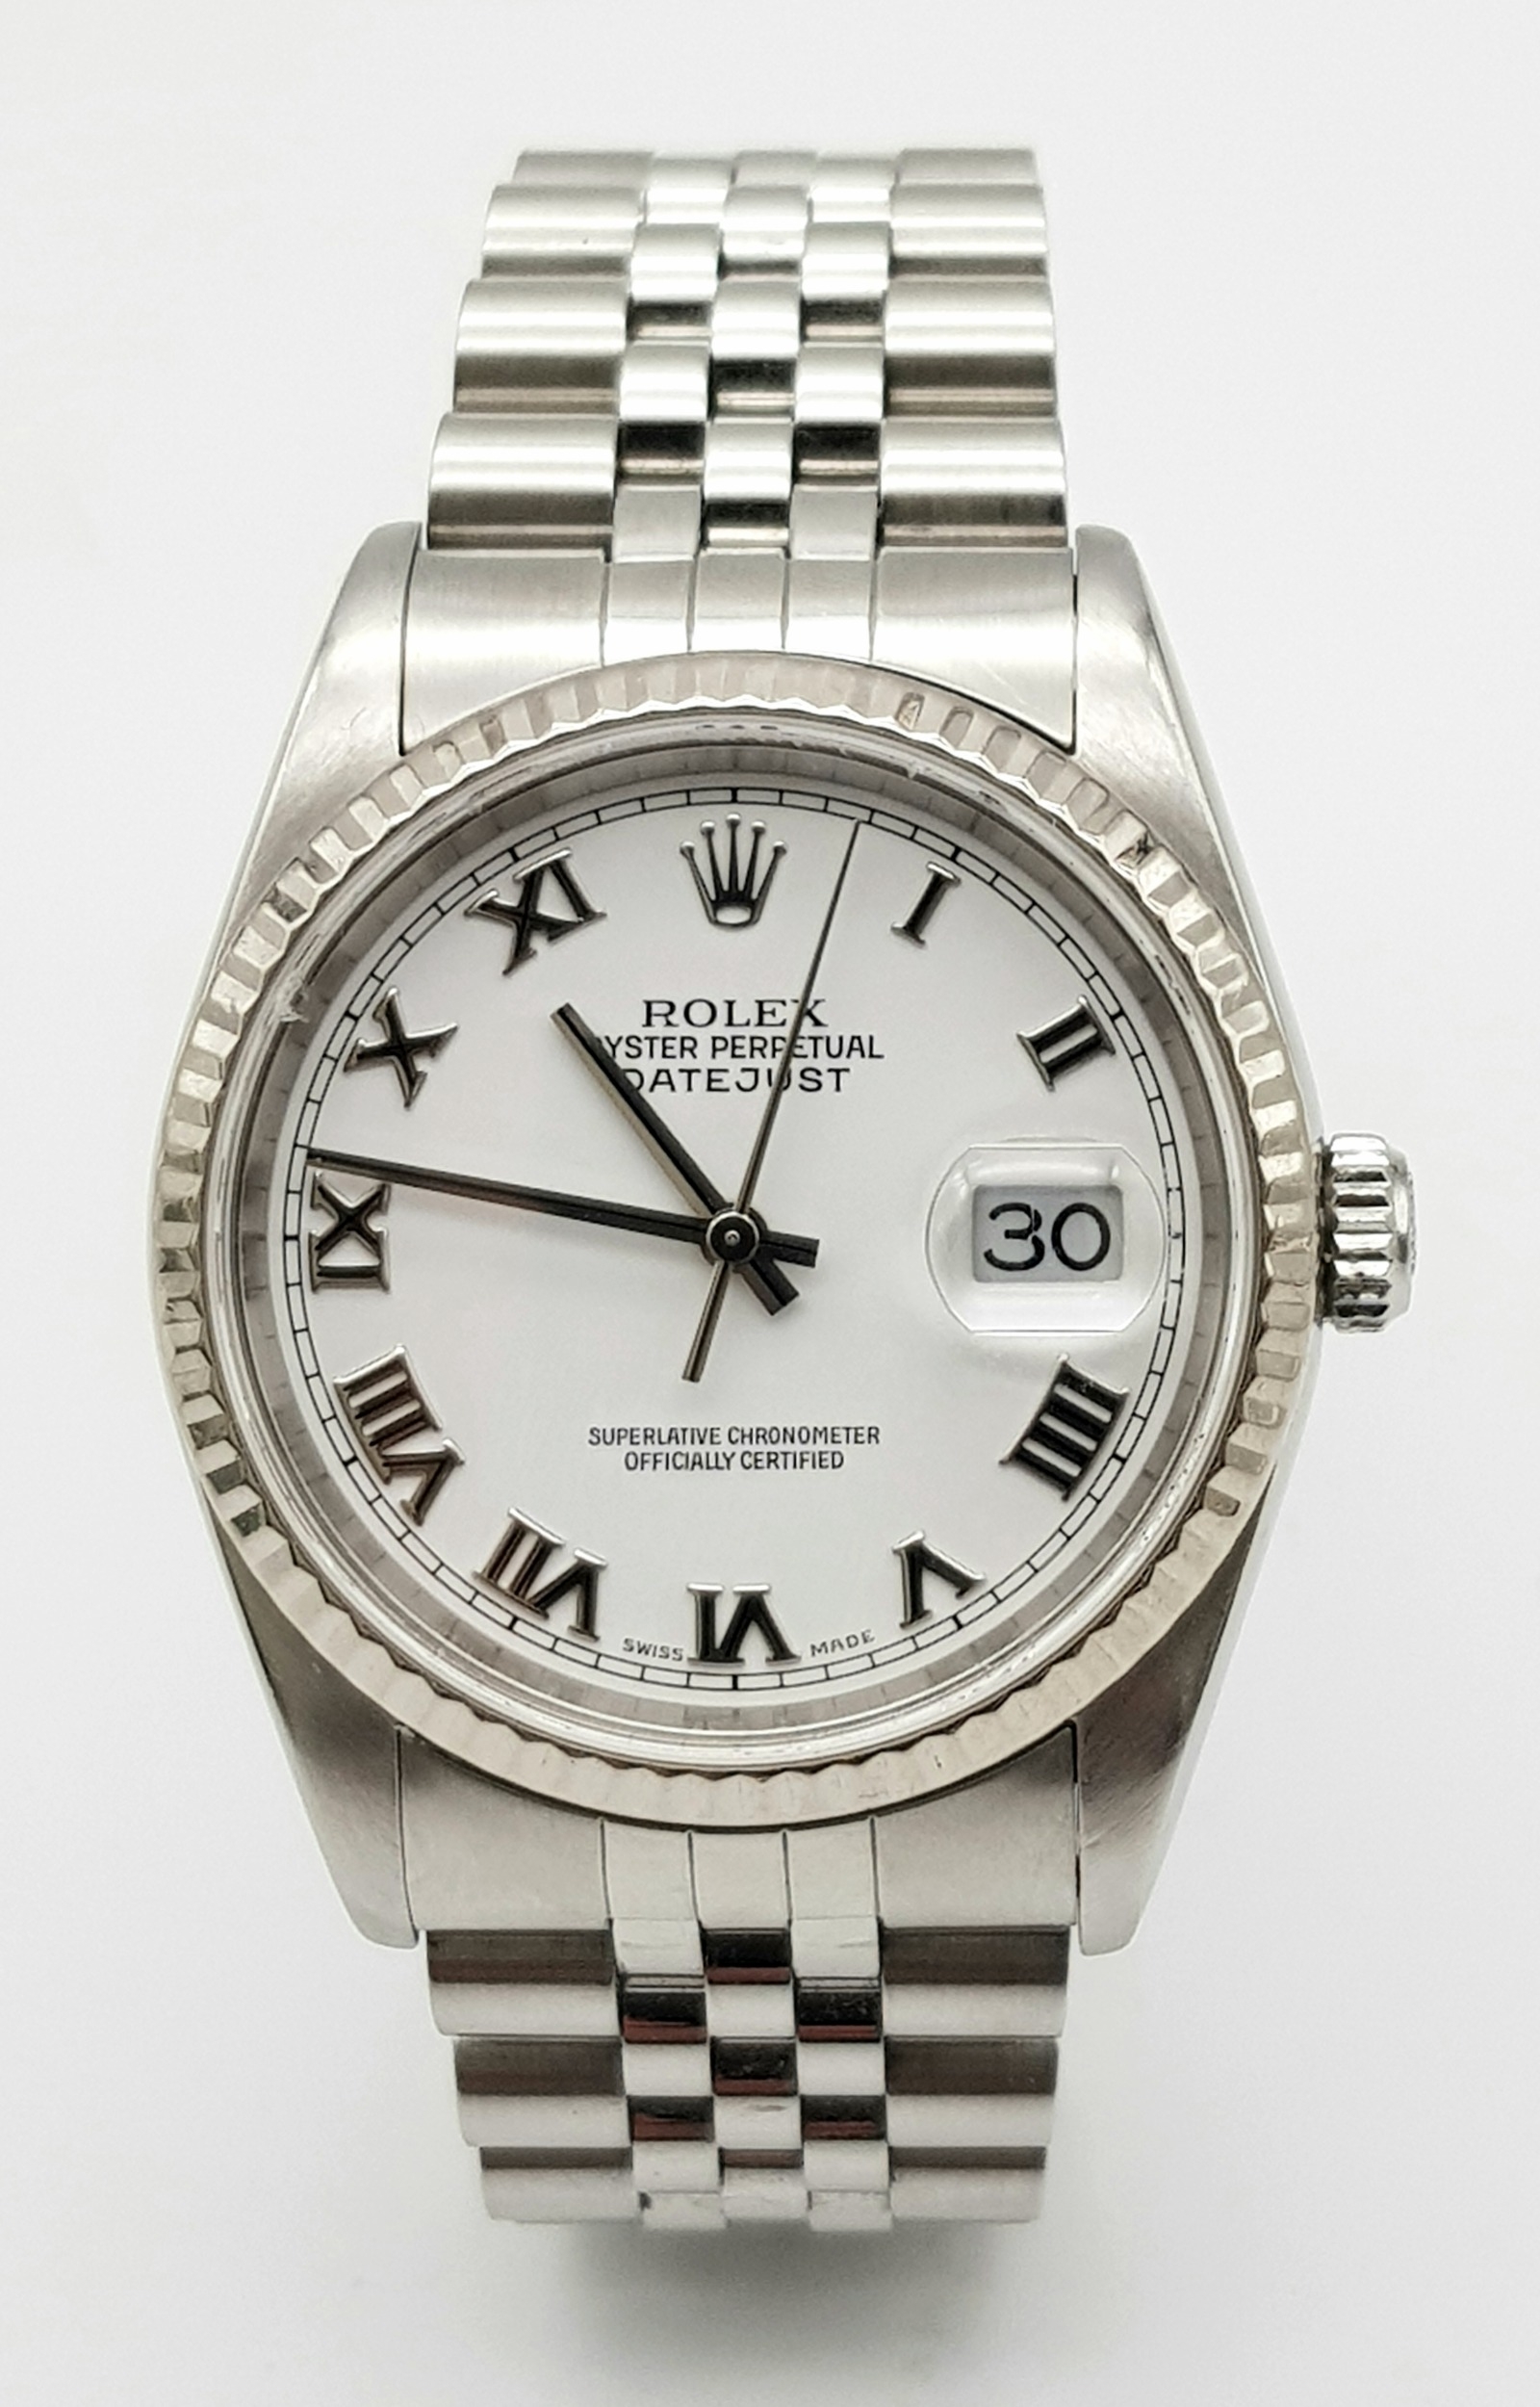 A ROLEX OYSTER PERPETUAL DATEJUST GENTS WATCH IN STAINLESS STEEL WITH WHITE DIAL AND ROMAN - Image 2 of 9